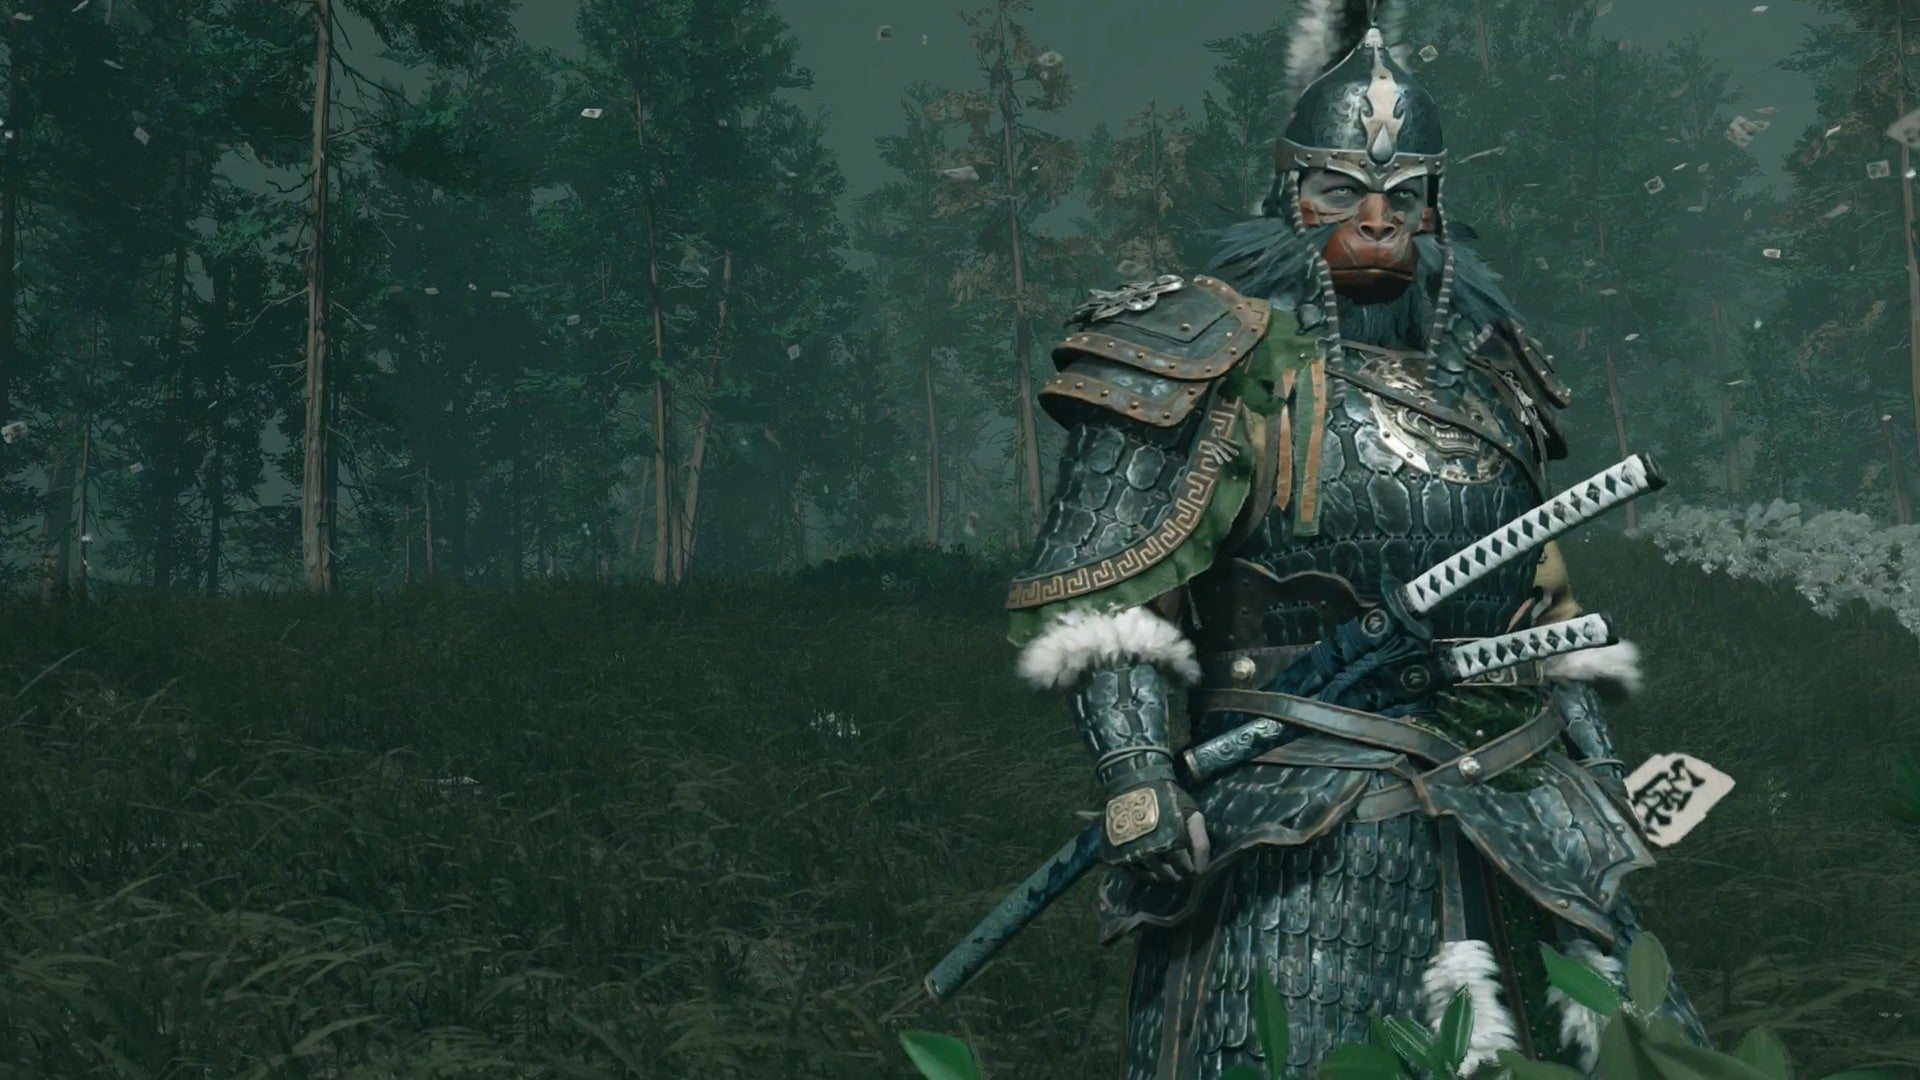 Ghost of Tsushima's Director's Cut upgrades are nice, but the new content  is what matters